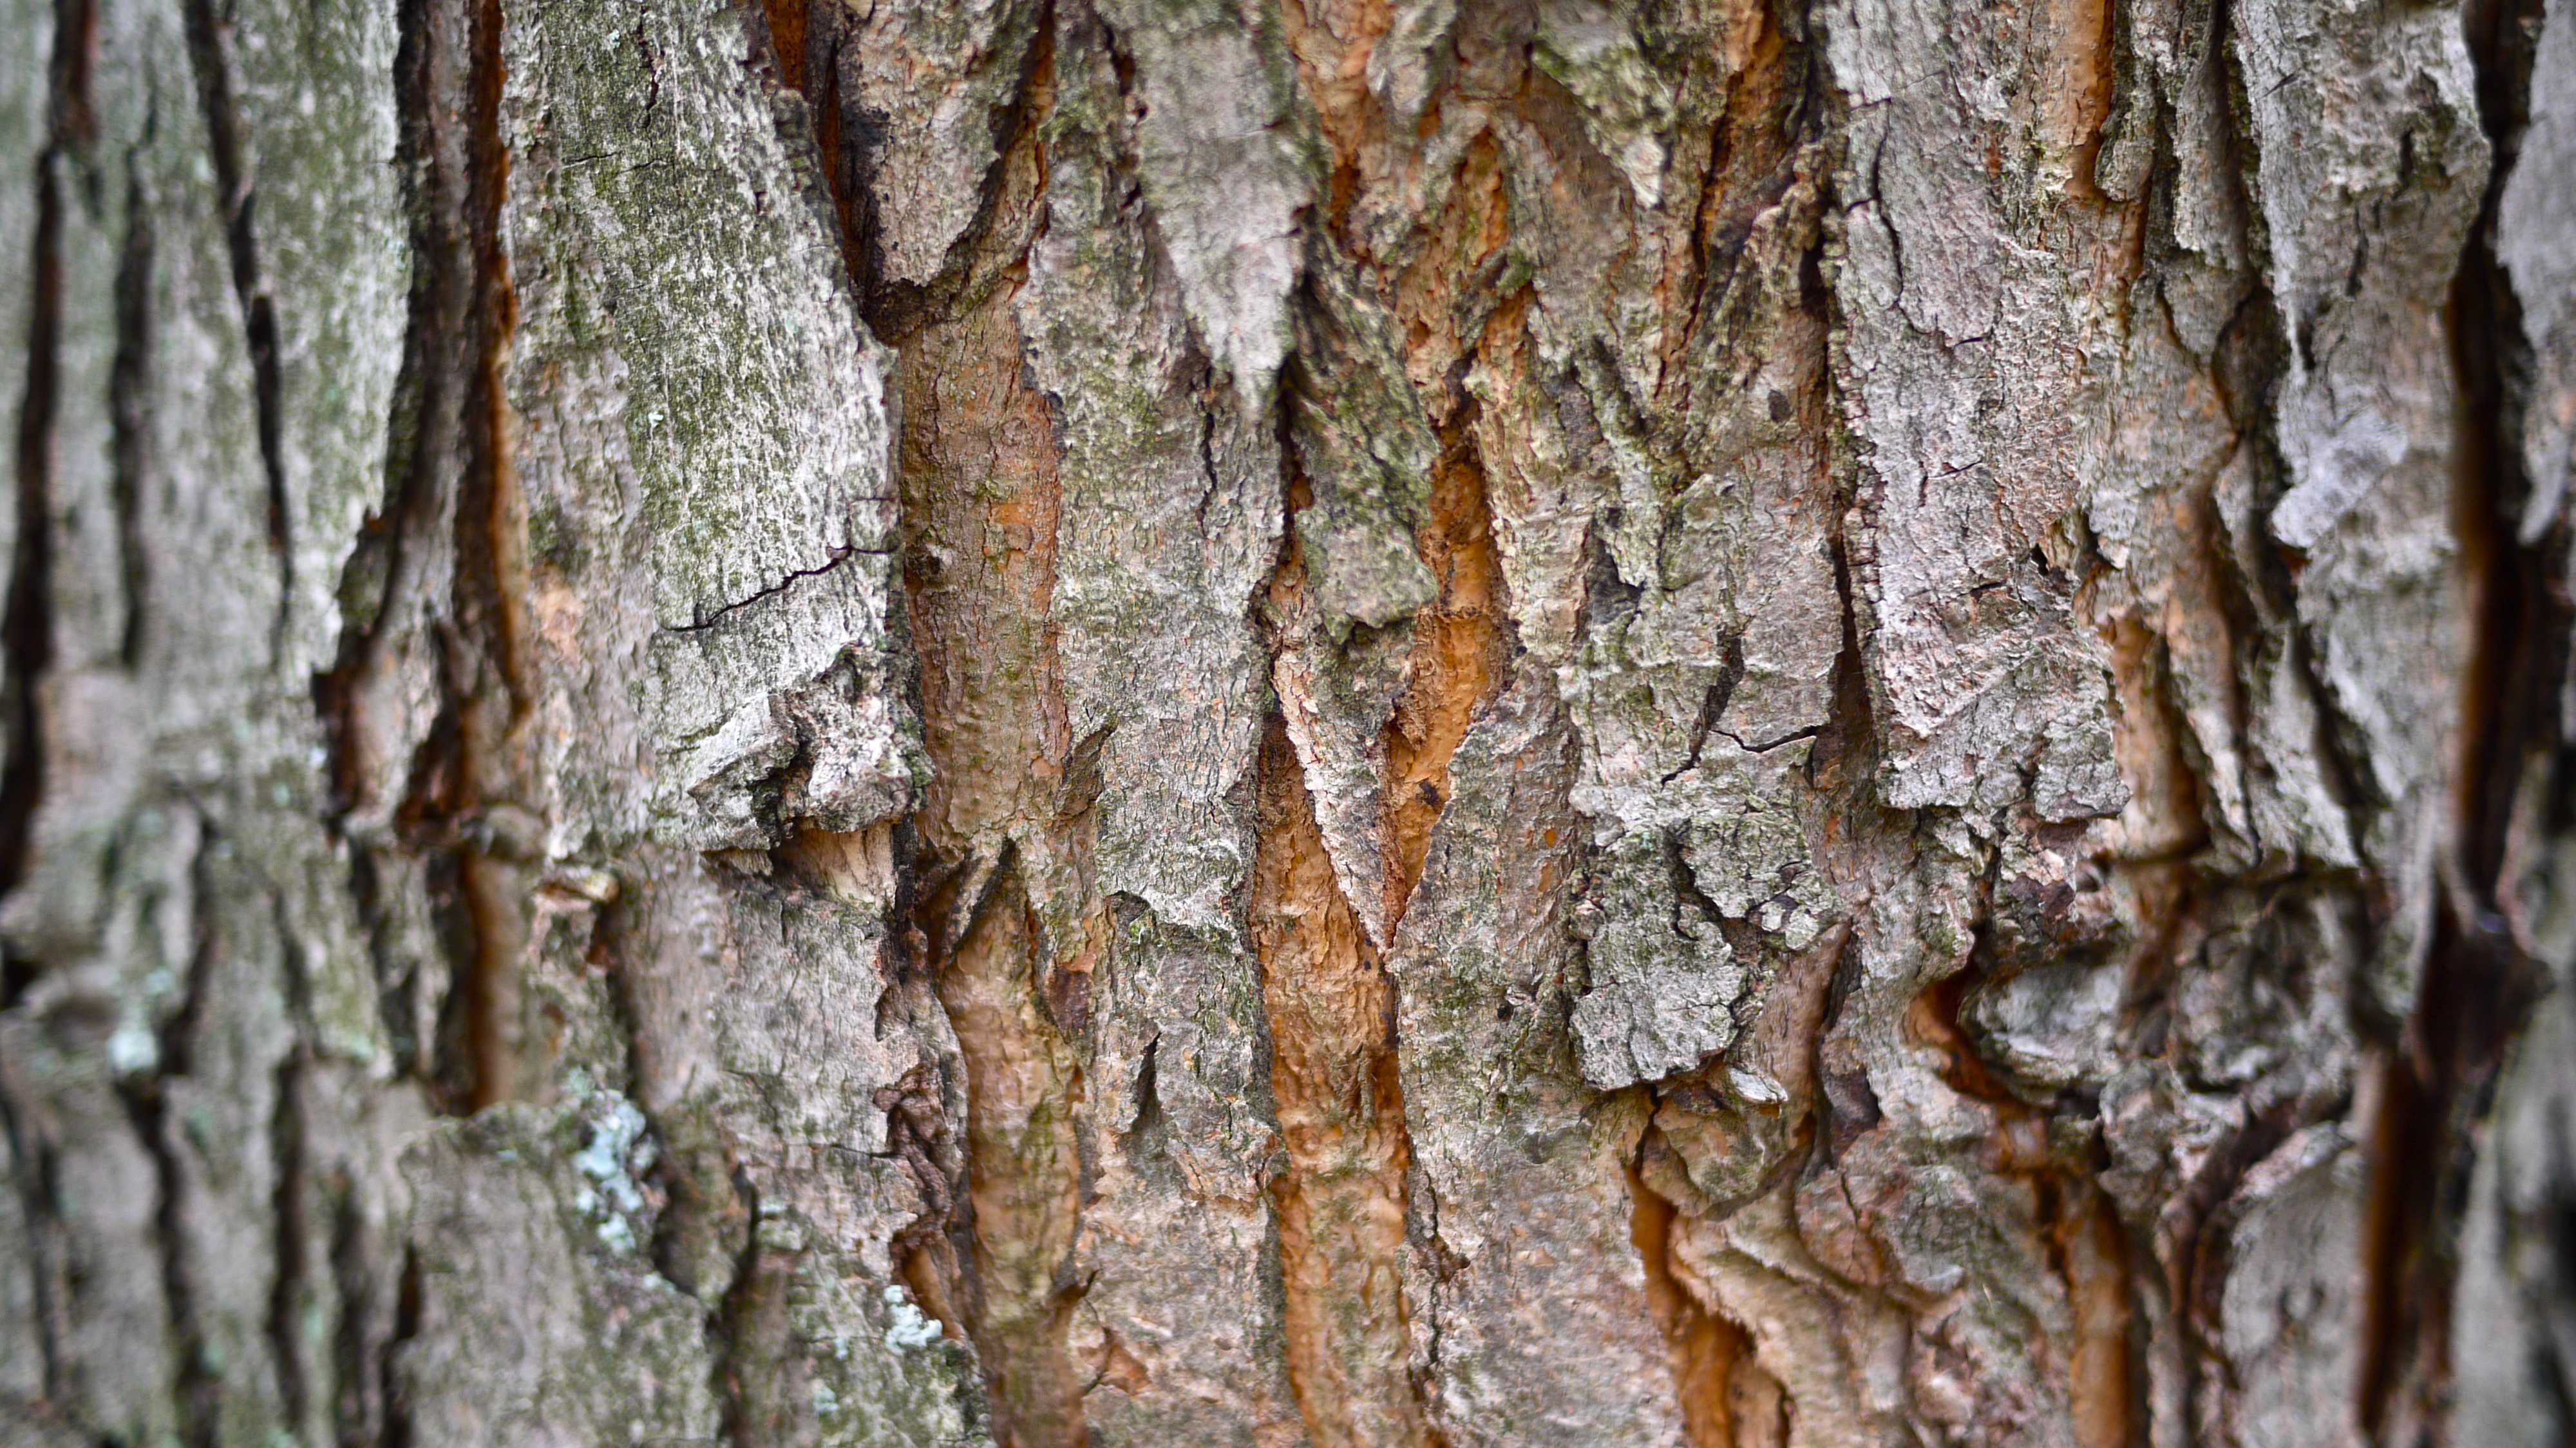 Tree bark texture background No cost royalty free stock